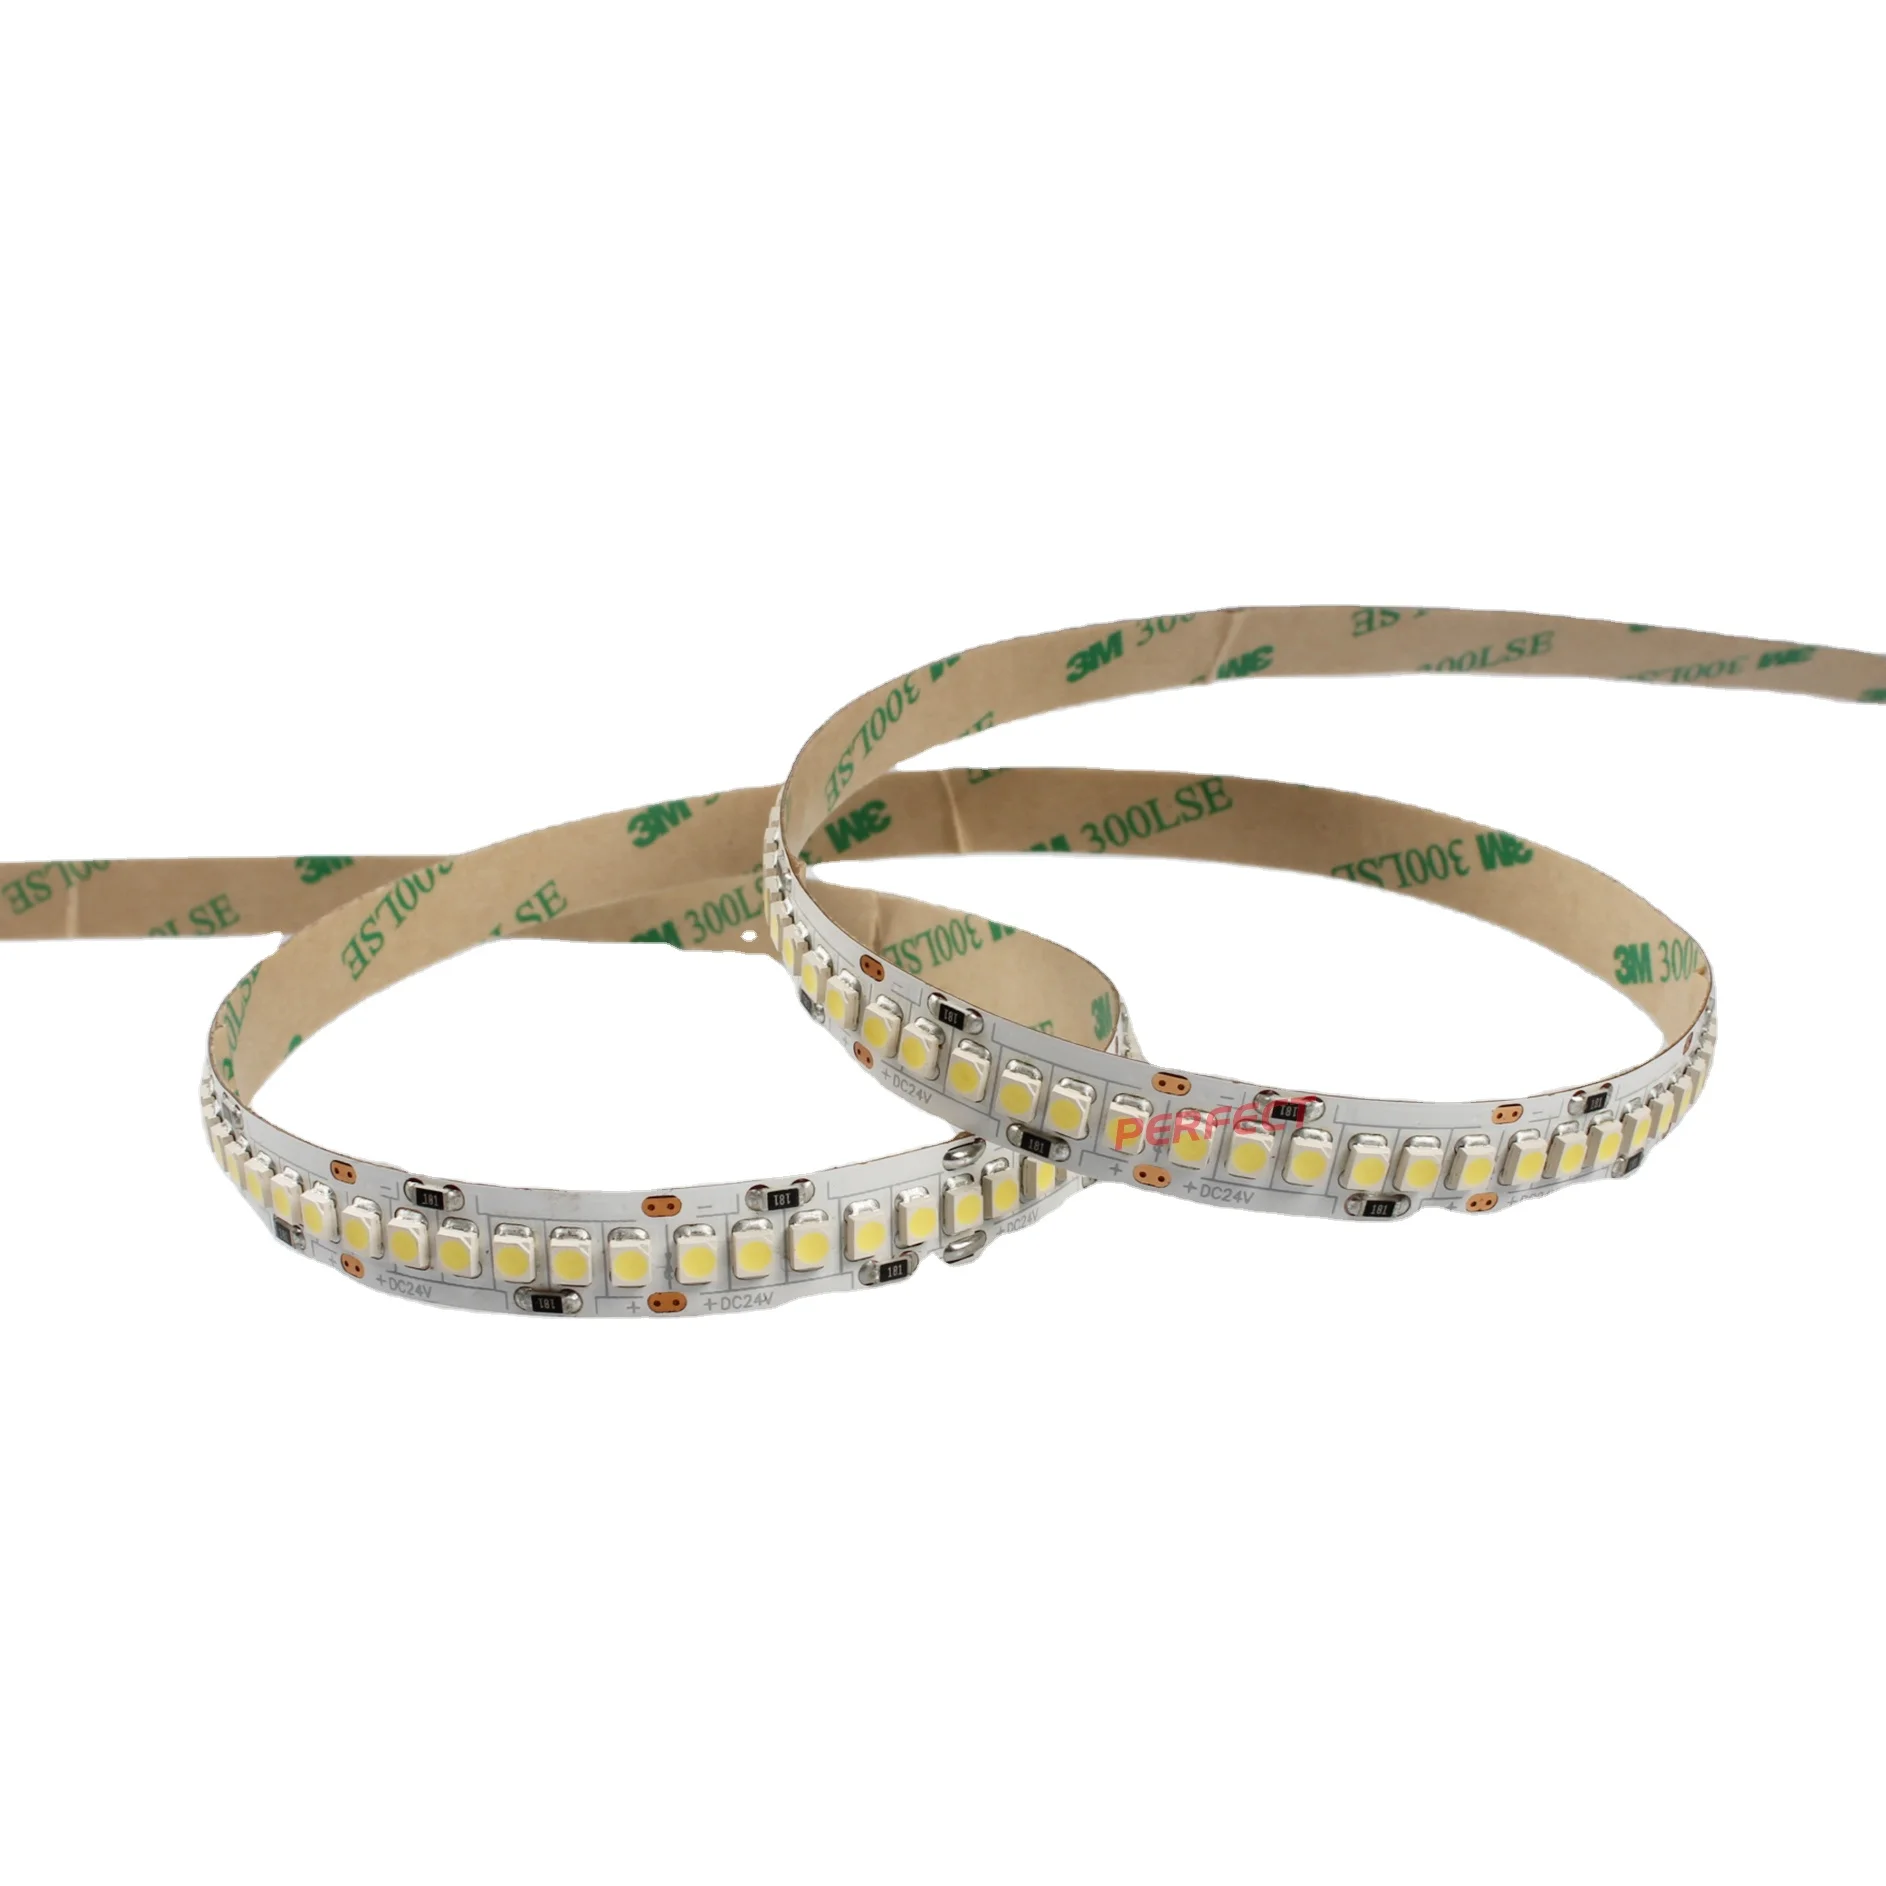 shenzhen perfect led strip 5m 1200 LED 3528SMD flexible light 240 led/m no-waterproof LED strip tape with Dimmer